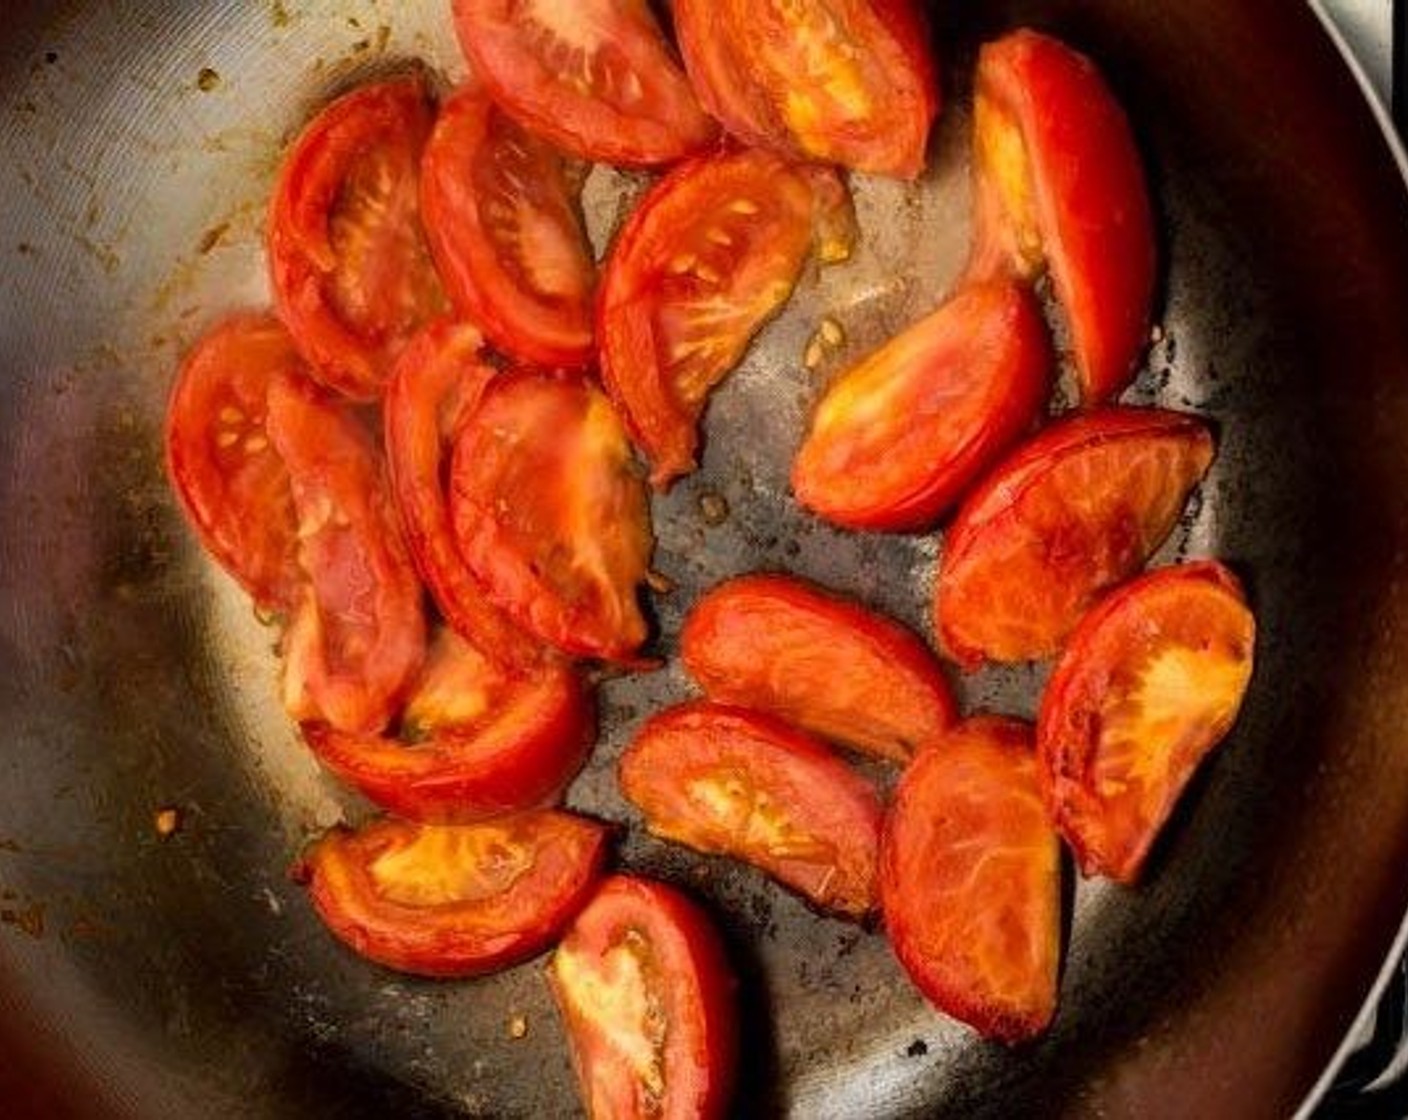 step 3 Add Cooking Oil (1 Tbsp) to the hot wok, then add the Tomatoes (2). Allow the tomatoes to char slightly for about 30 seconds, then flip them over.